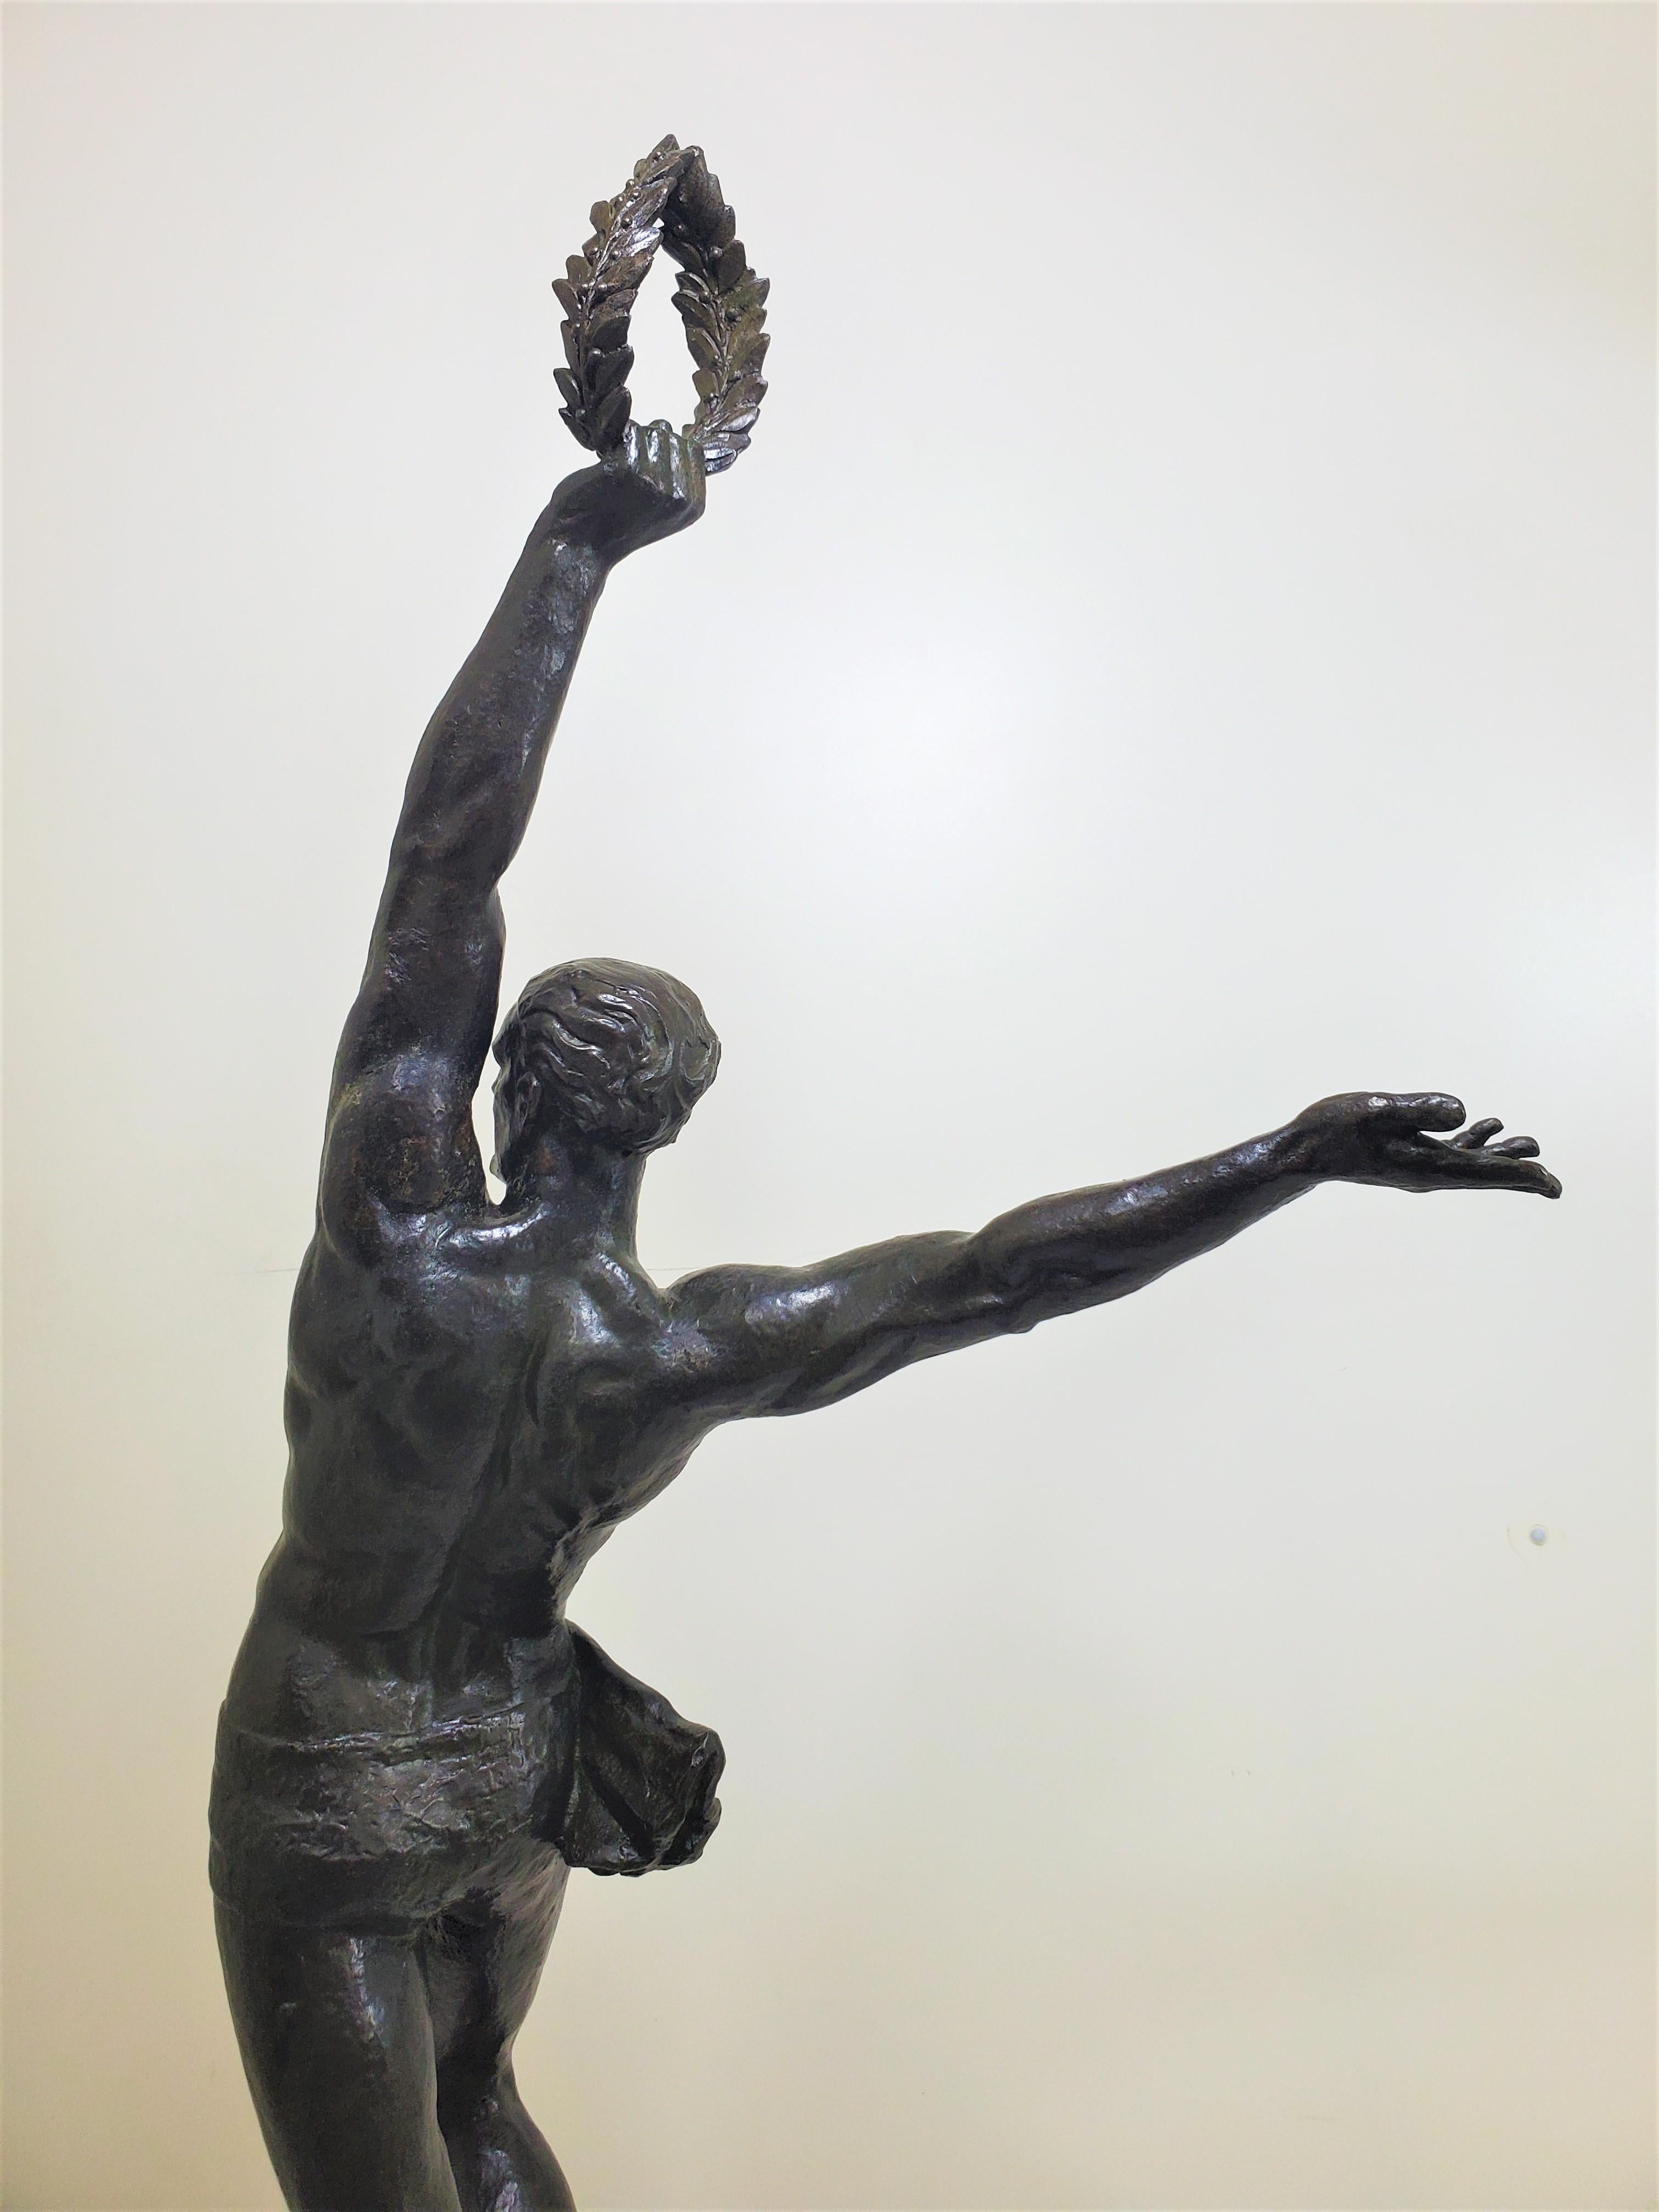 Large Original French Art Deco Bronze of a Semi-Nude Male Athlete by Le Faguays For Sale 8